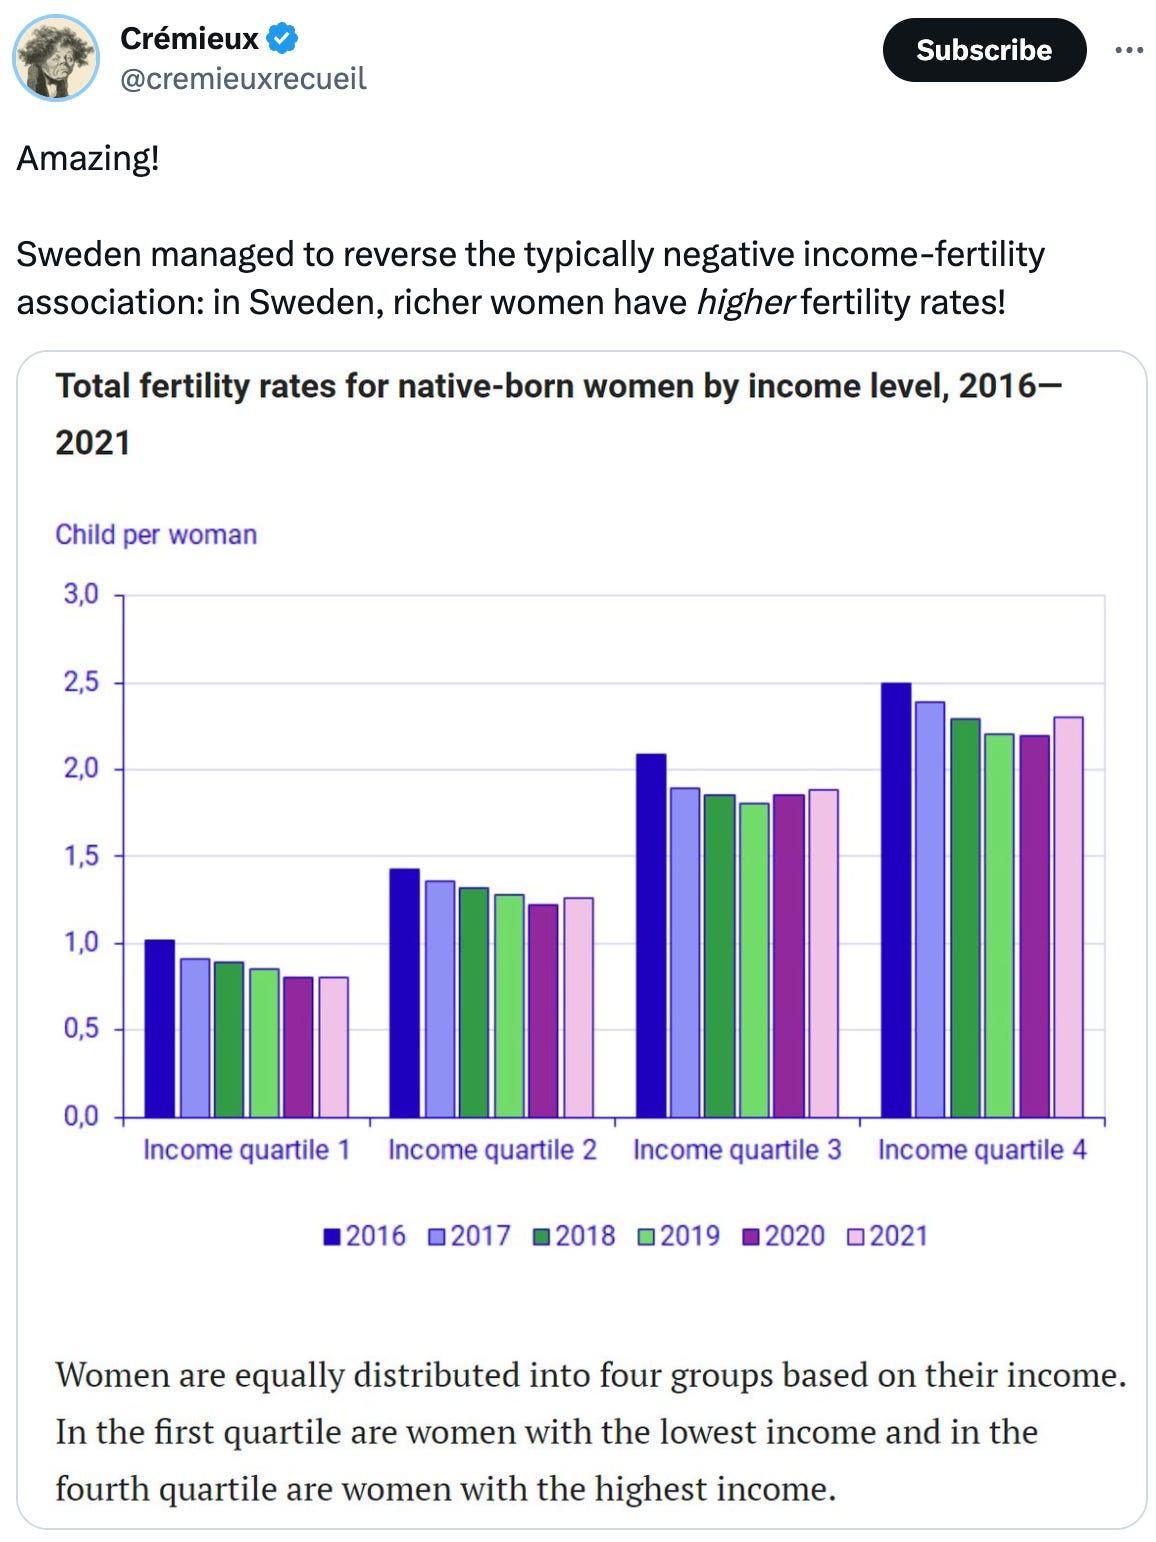  See new Tweets Conversation Crémieux @cremieuxrecueil Amazing!  Sweden managed to reverse the typically negative income-fertility association: in Sweden, richer women have higher fertility rates!